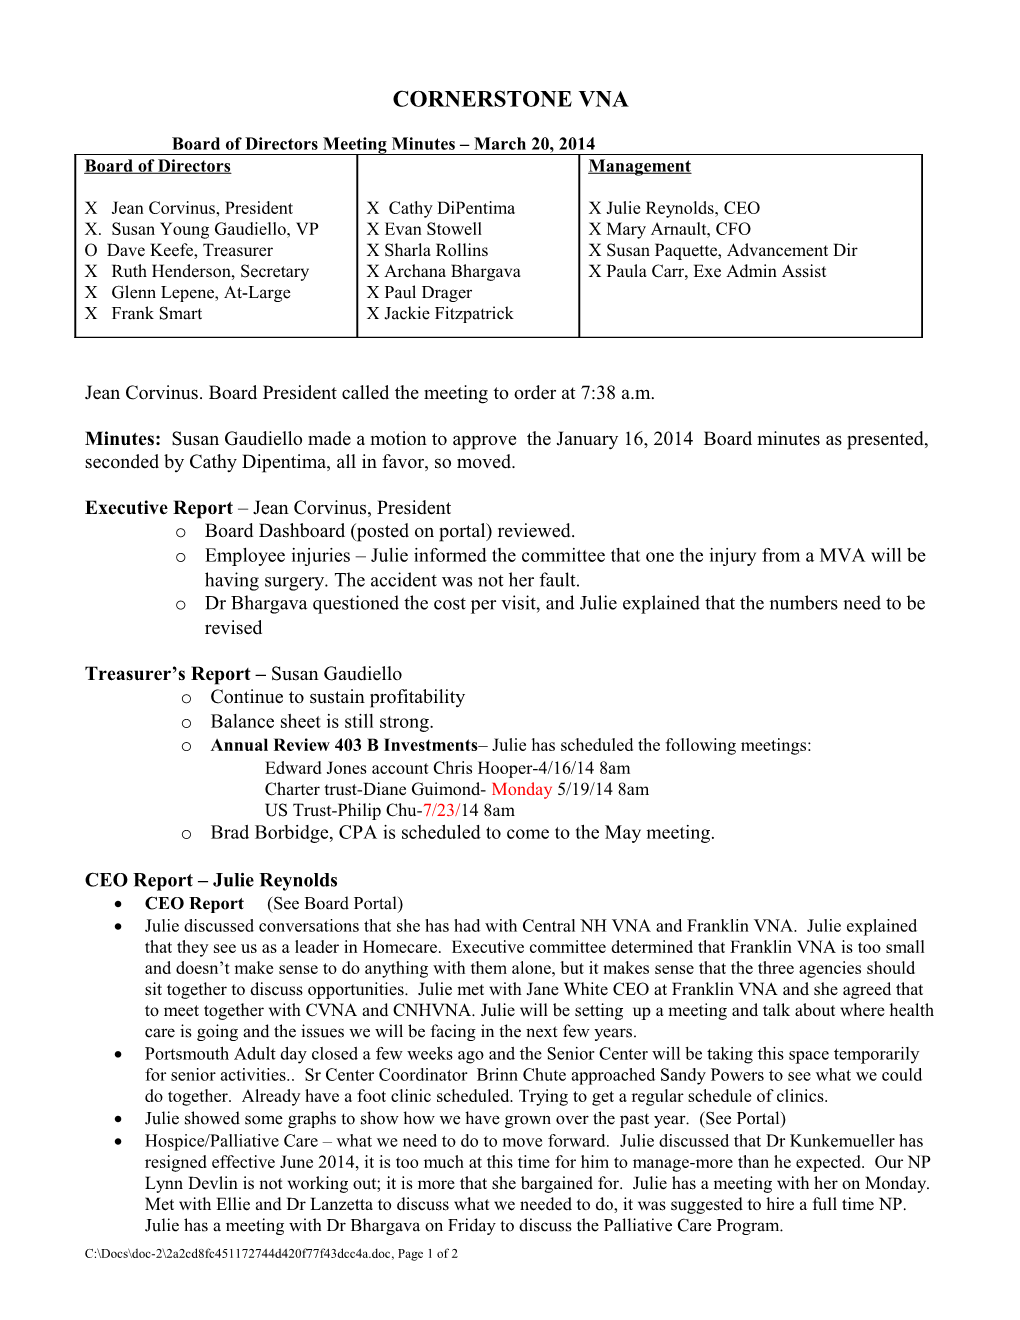 Board of Directors Meeting Minutes March 20, 2014